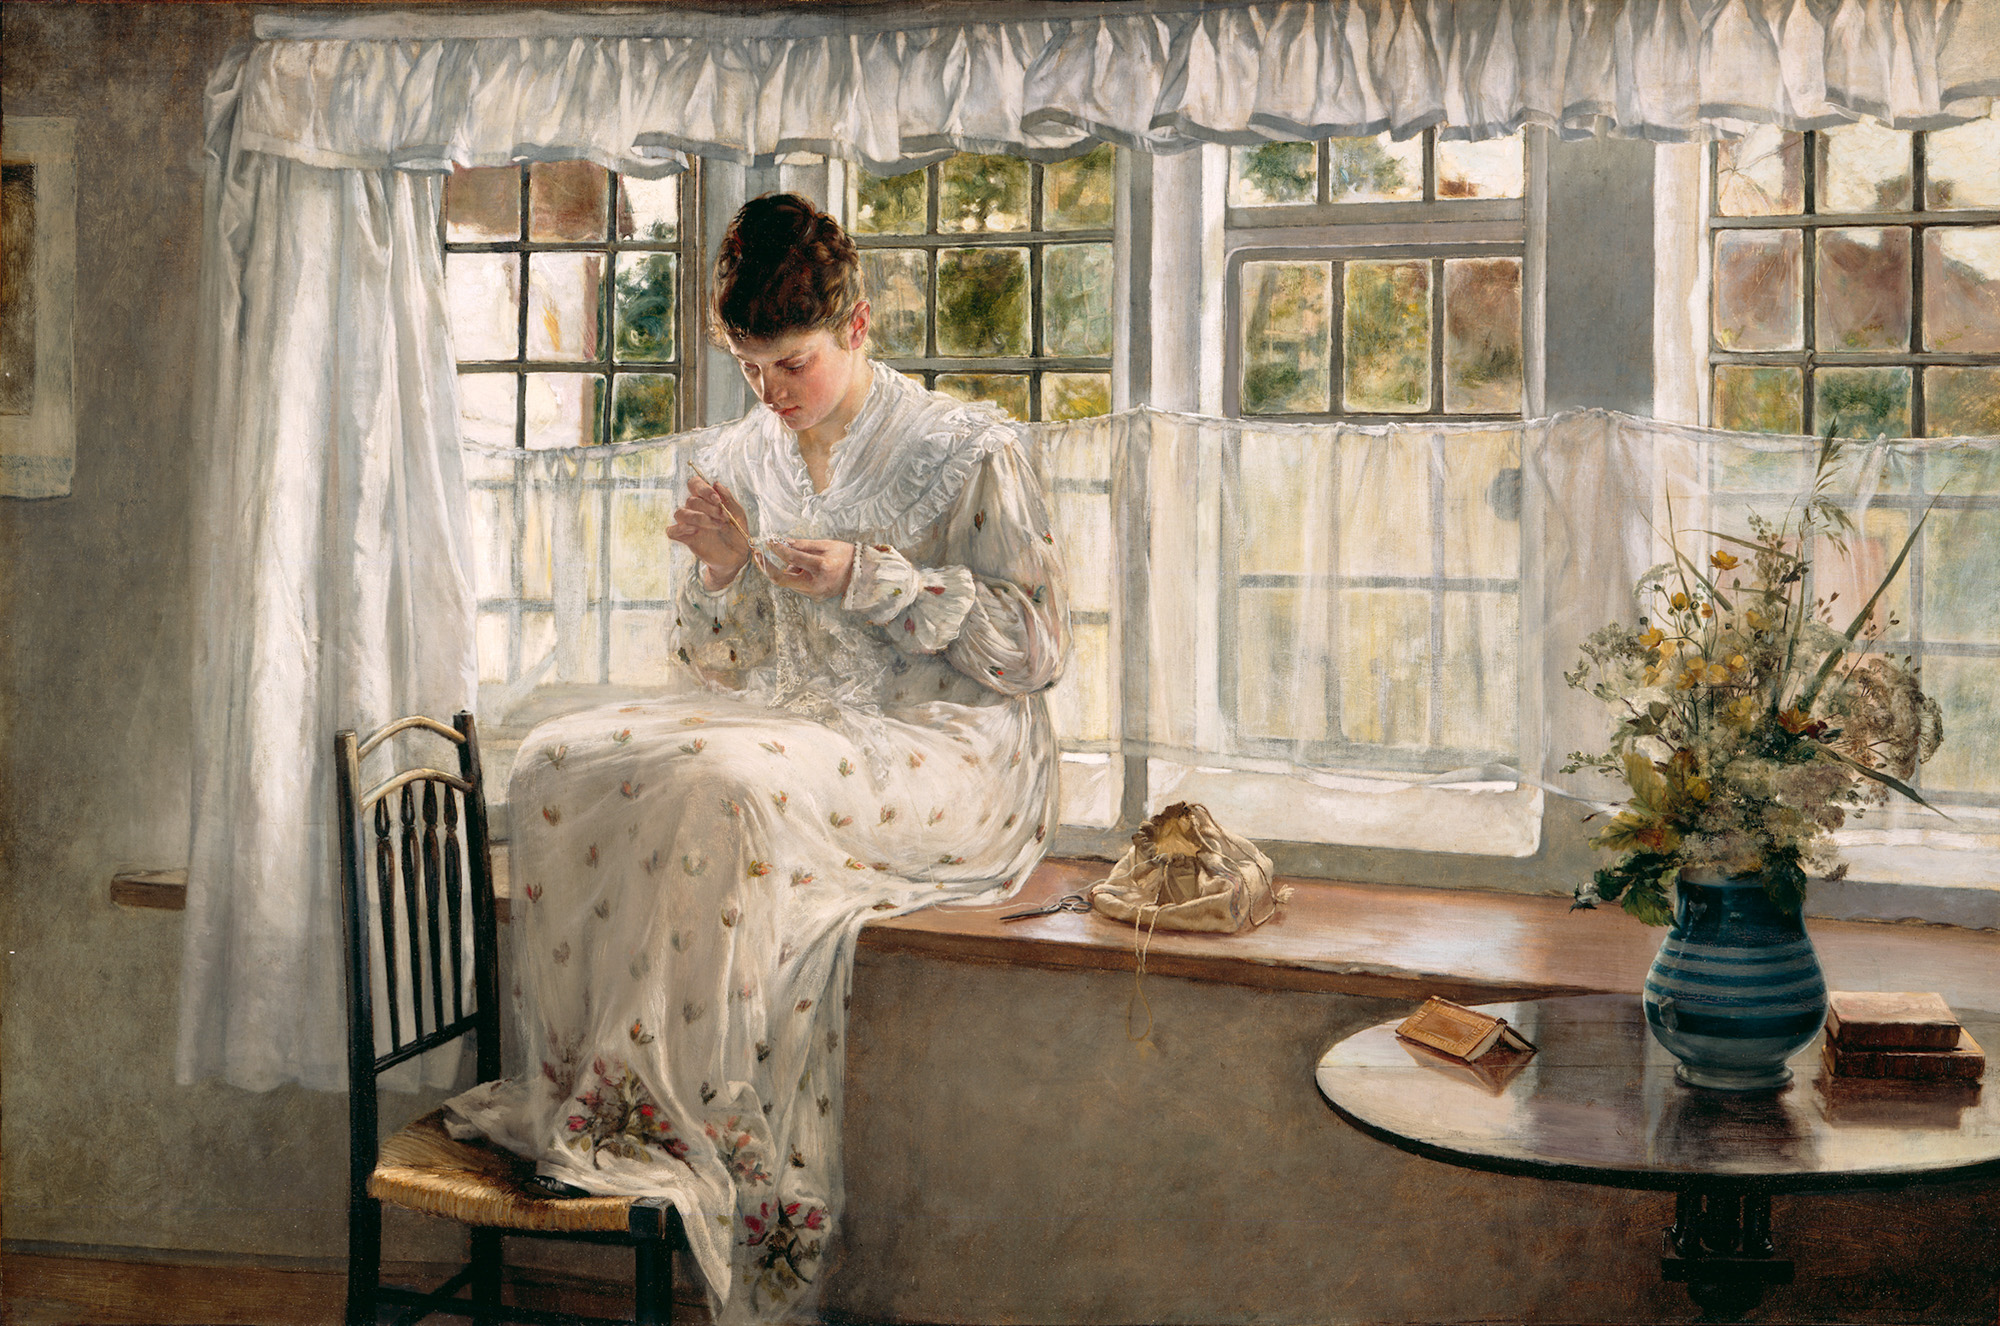 This image depicts a realist woman sitting in a window sewing. To her right is a table that holds a bouquet of yellow flowers. She is sitting in front of three windows, working while the sun pools in.